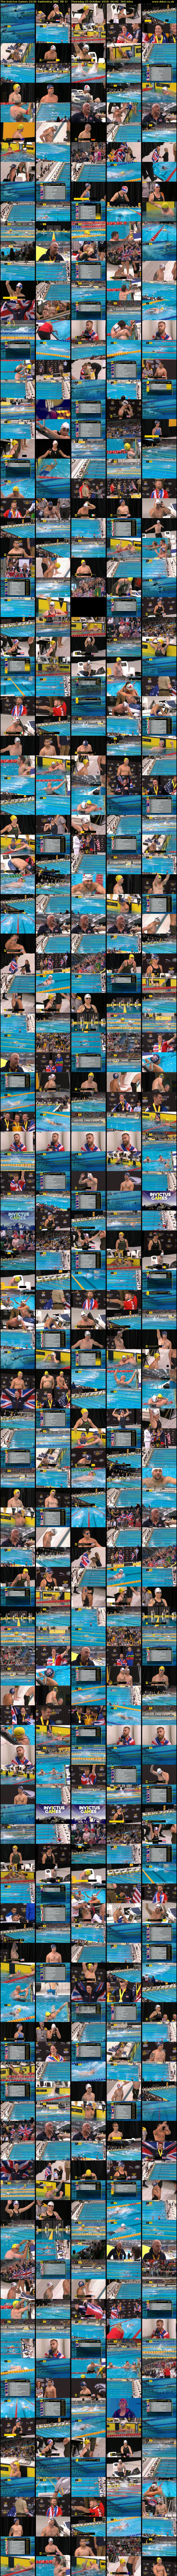 The Invictus Games 2018: Swimming (BBC RB 1) Thursday 25 October 2018 06:00 - 12:00